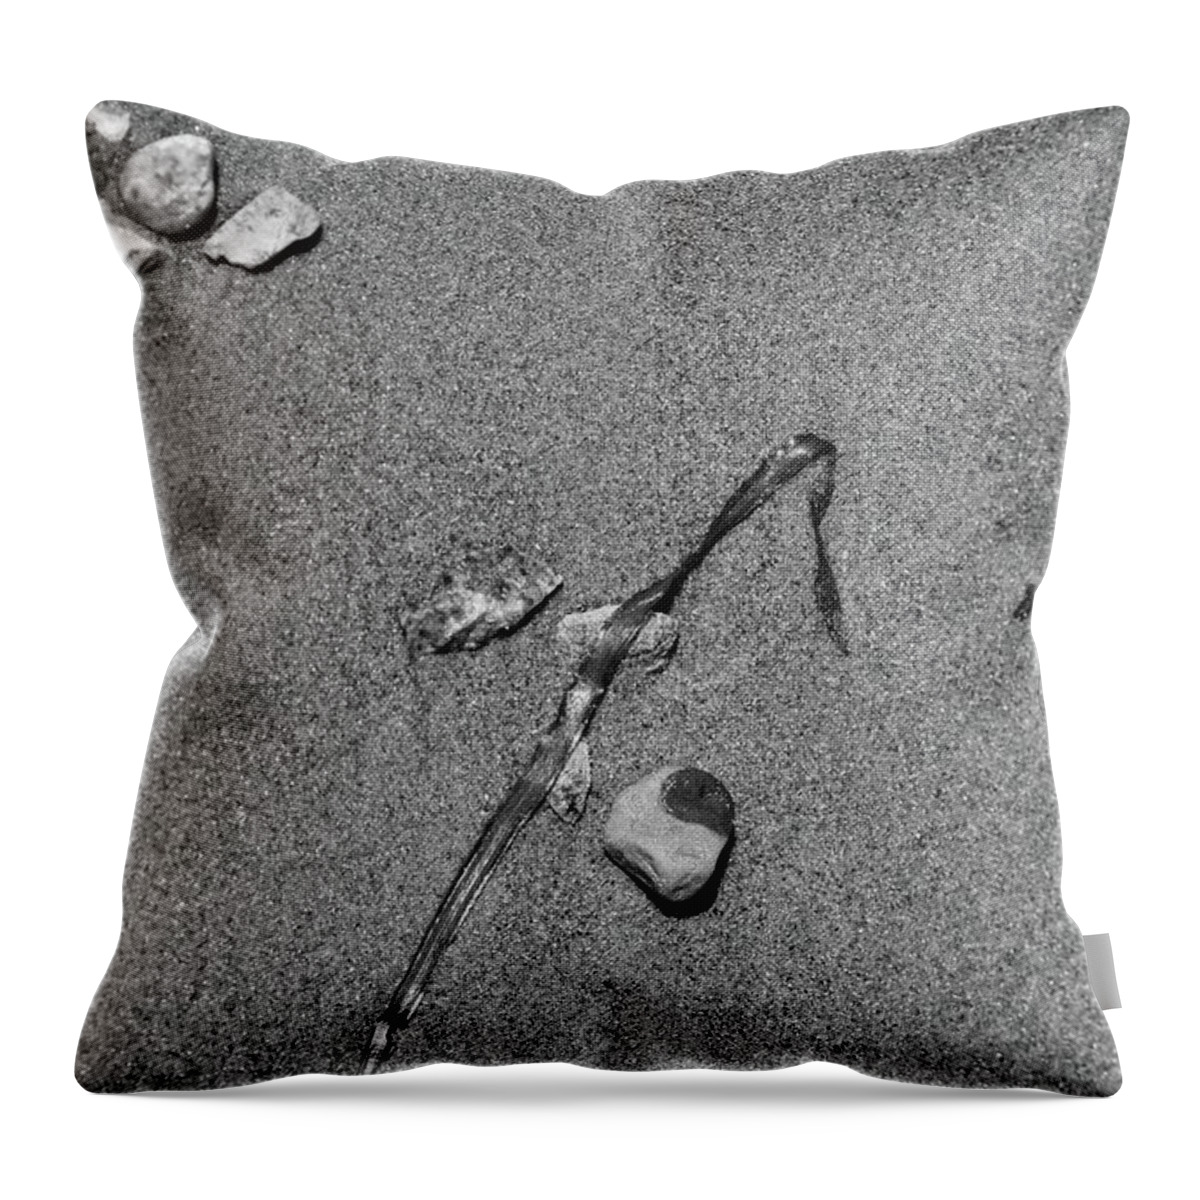 Water Throw Pillow featuring the photograph At Waters Edge 03 by Jimmy Ostgard